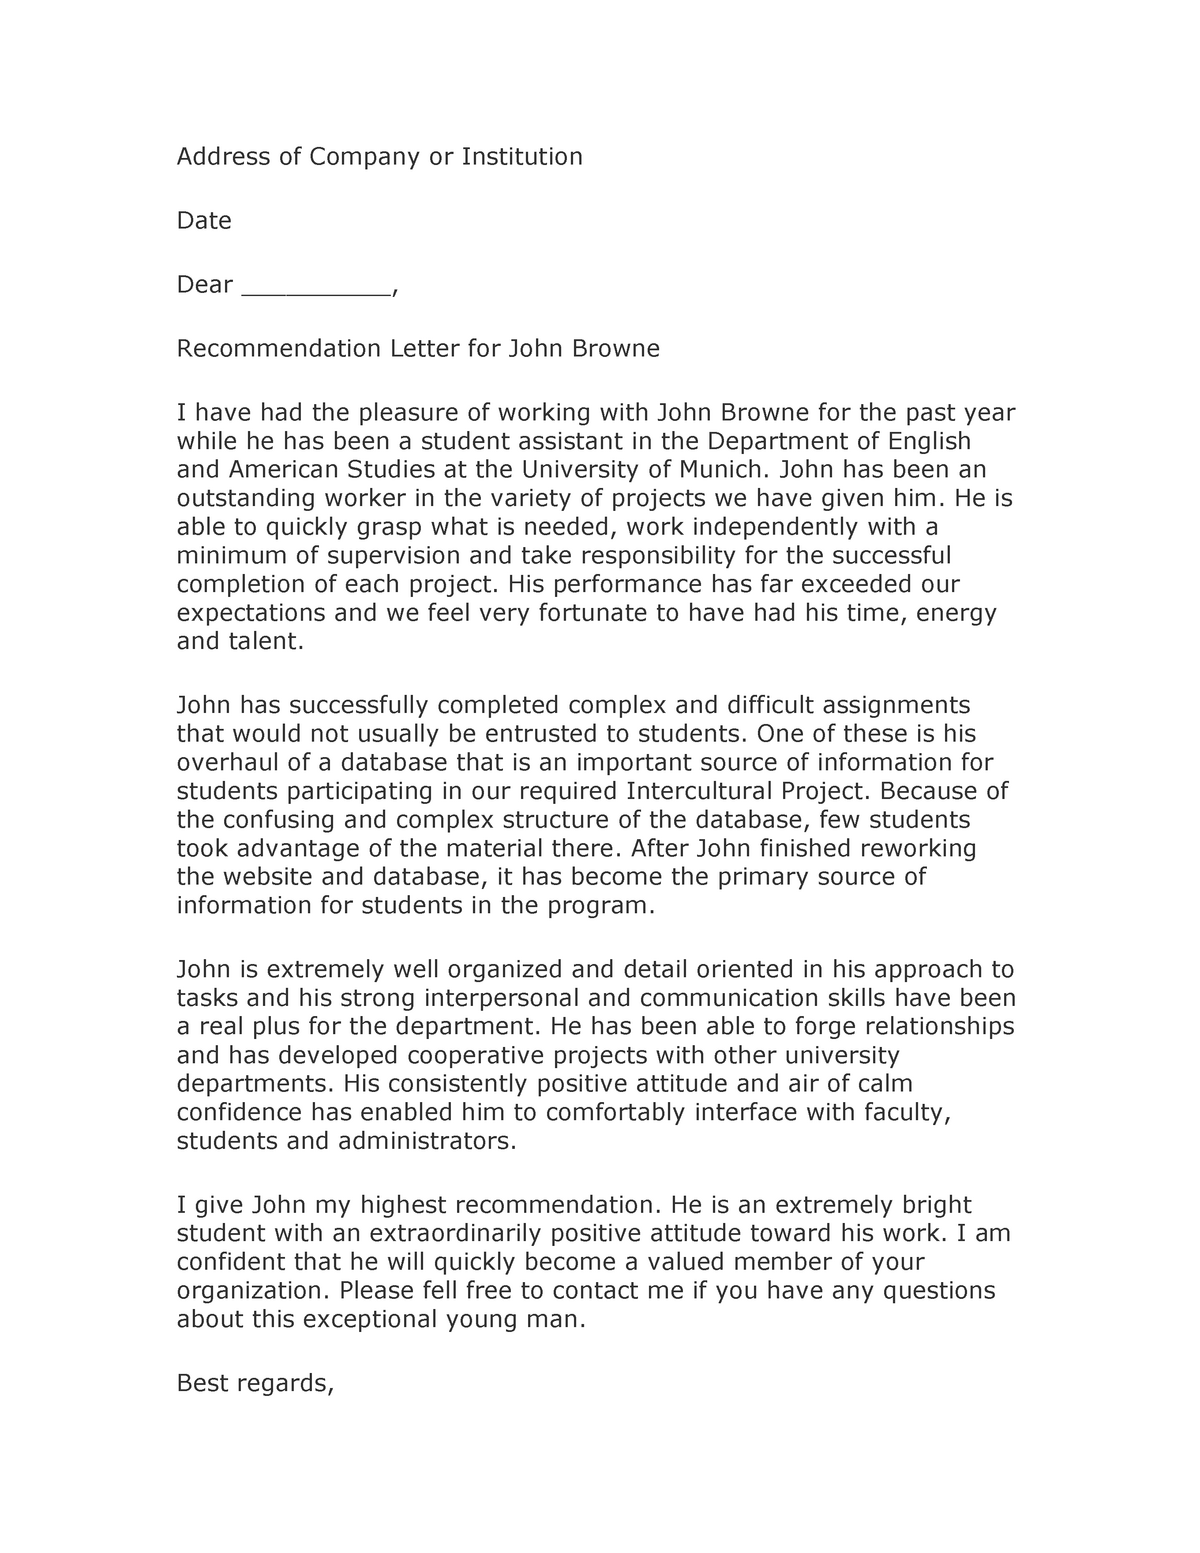 Practical recommendation letter - Address of Company or Institution ...